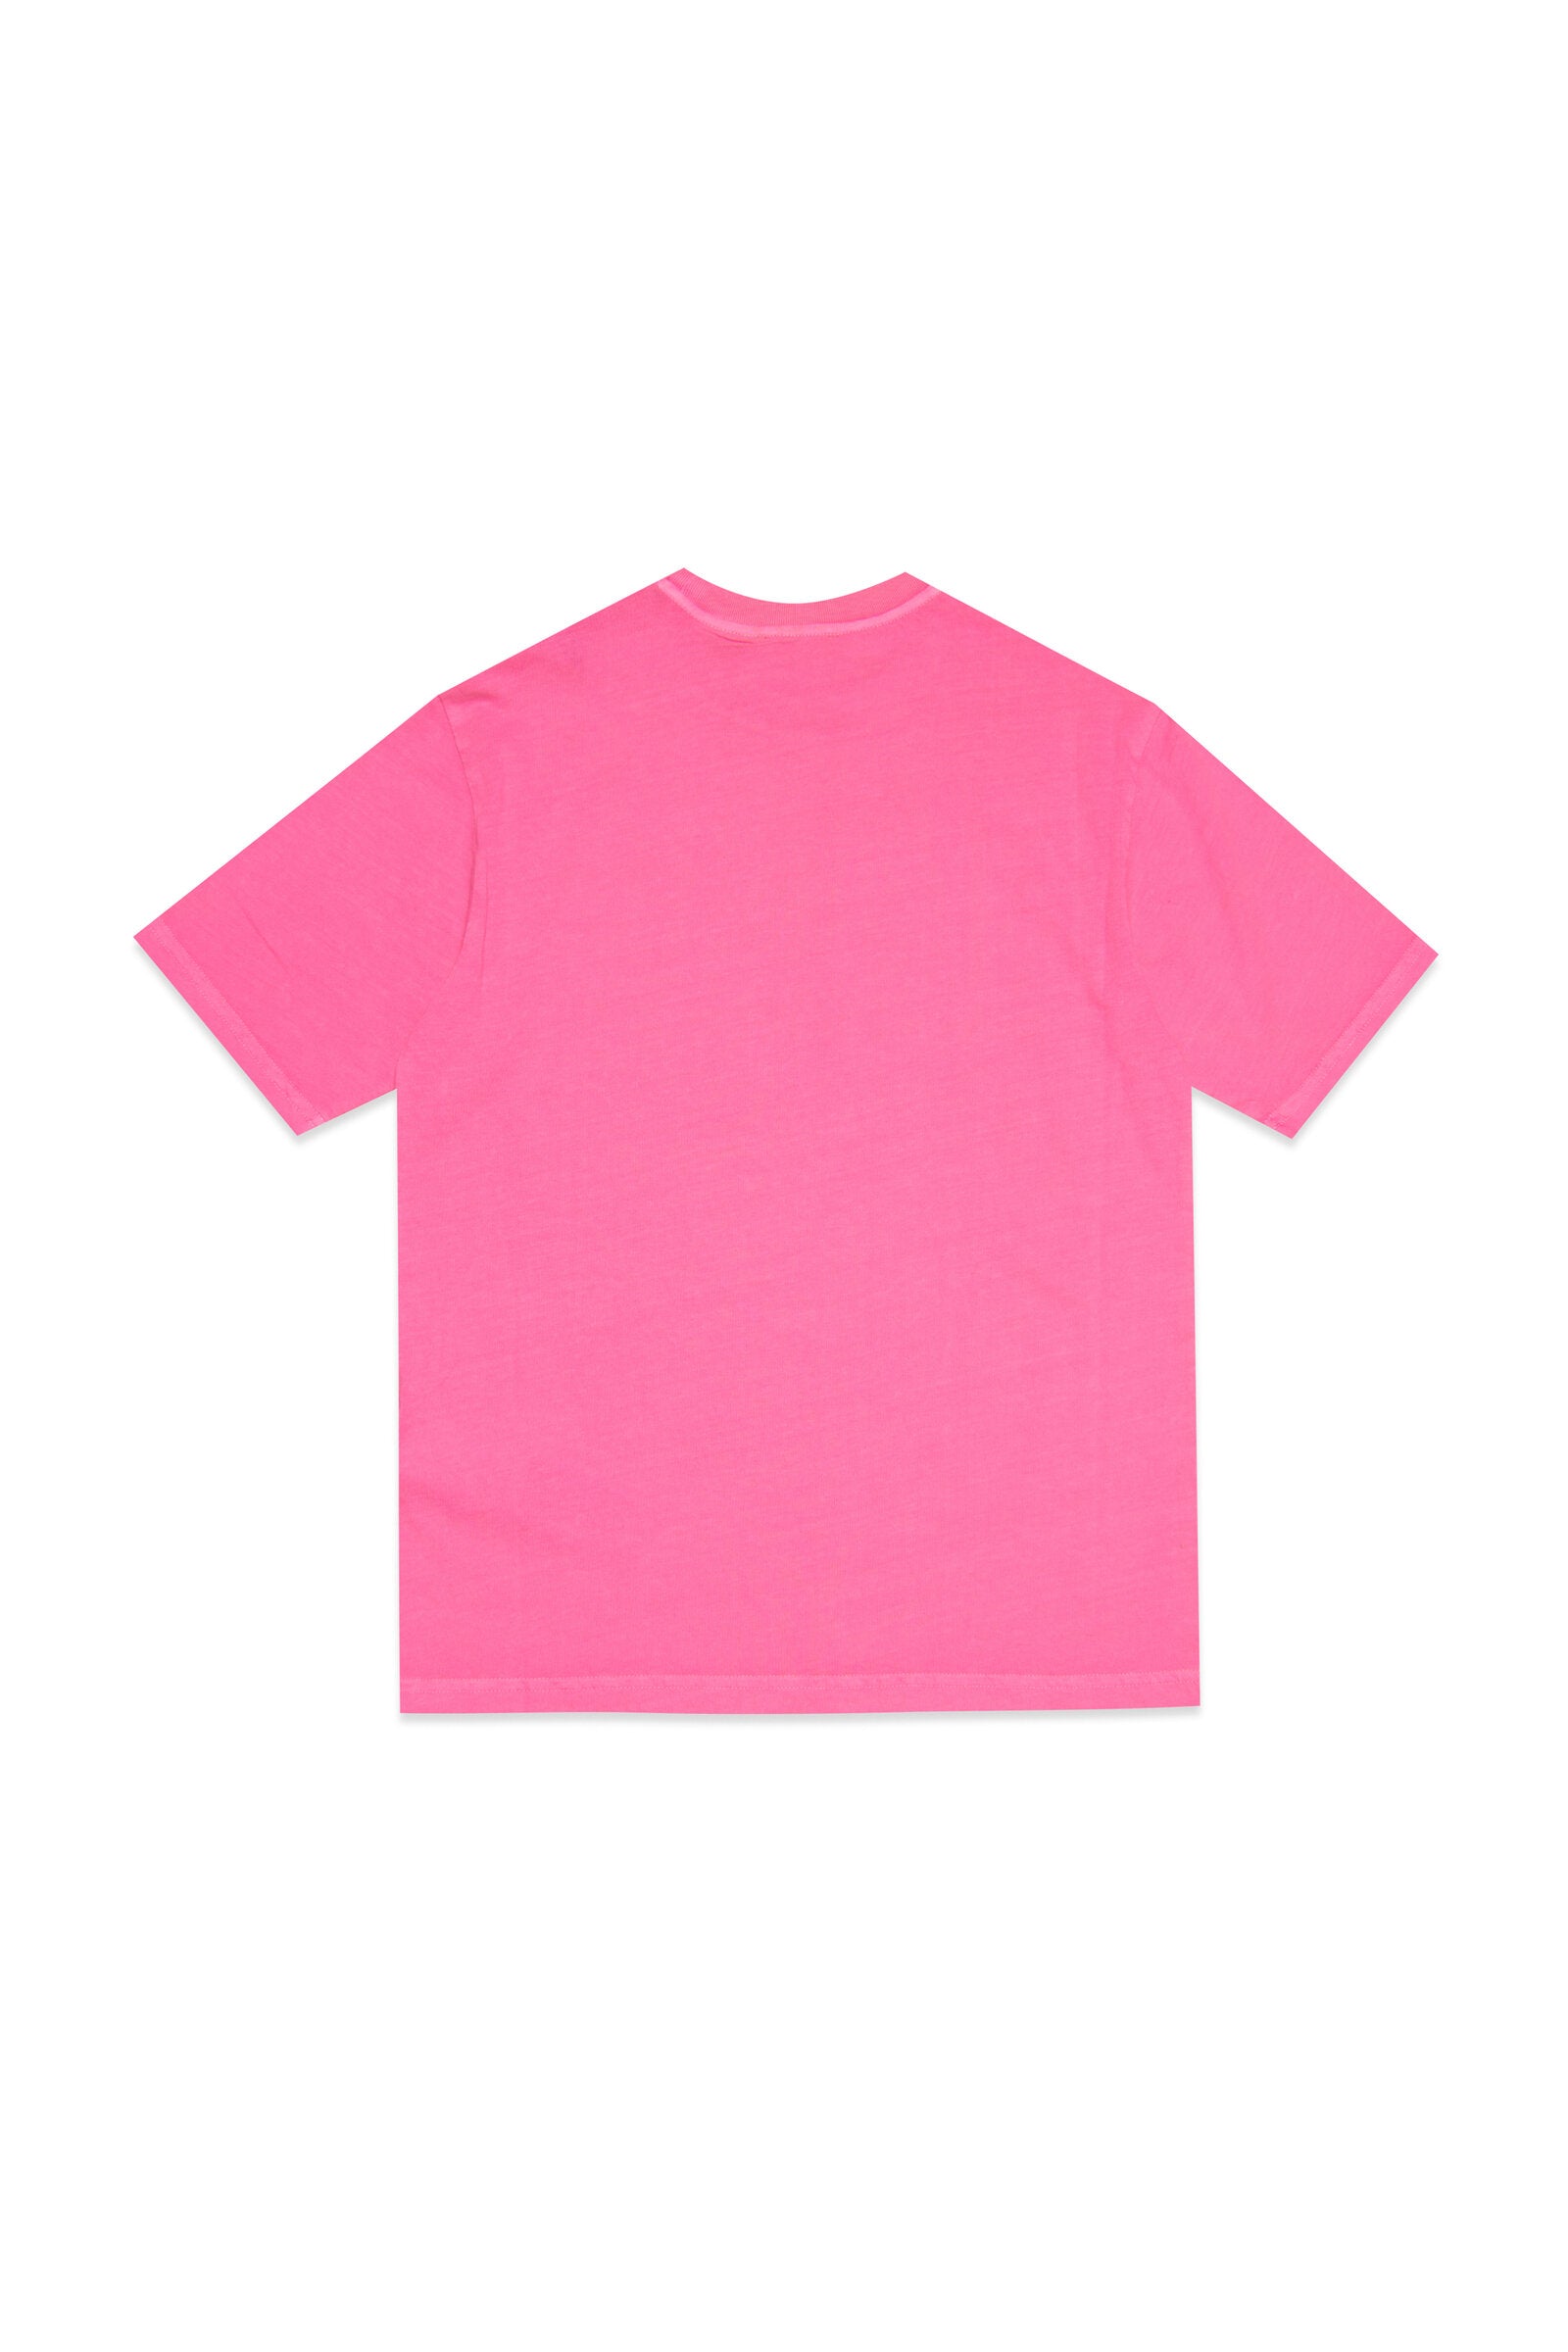 T-shirt rosa fluo in jersey con logo